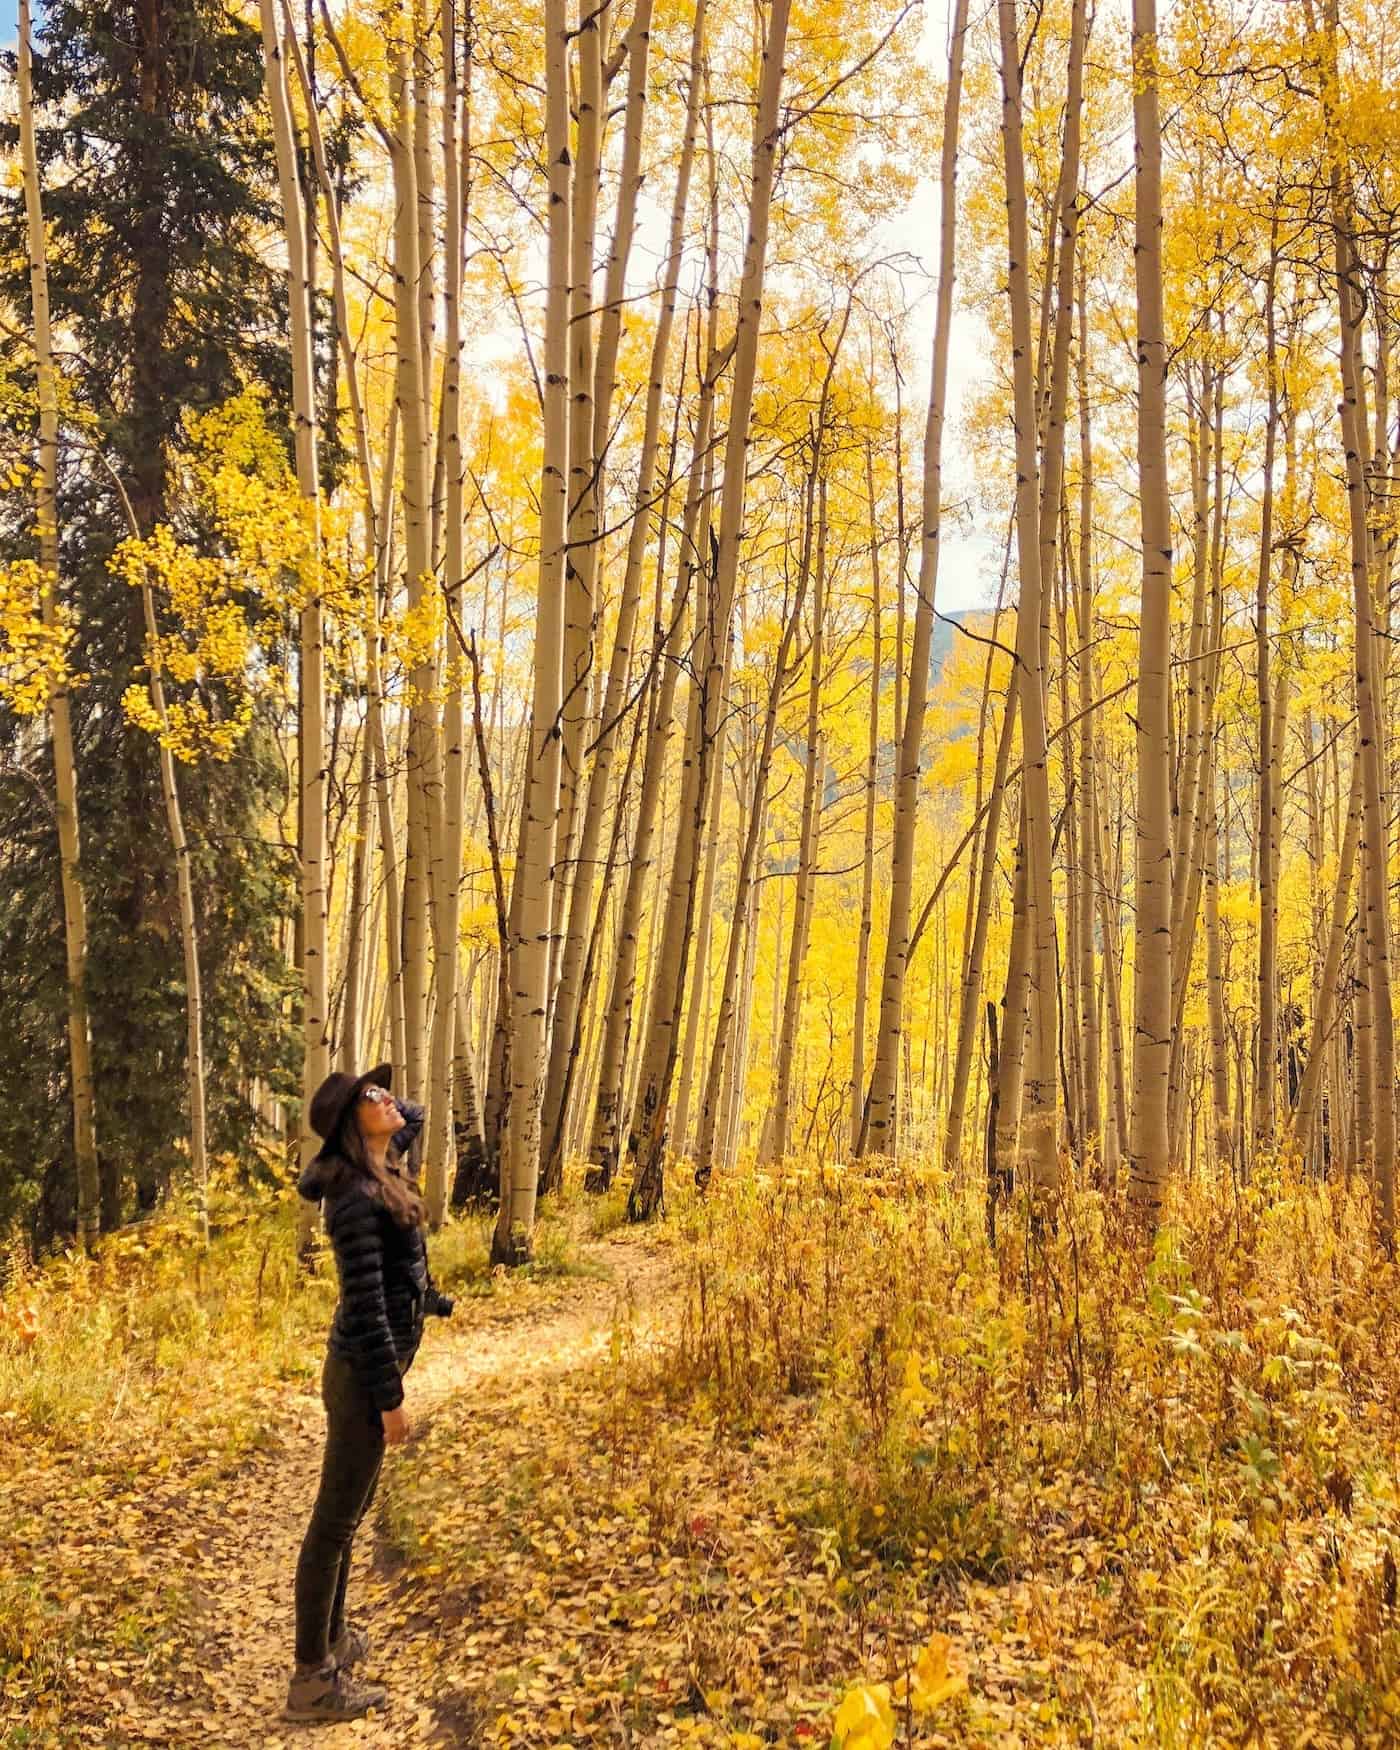 Standing in an Aspen Grove outside Crested Butte